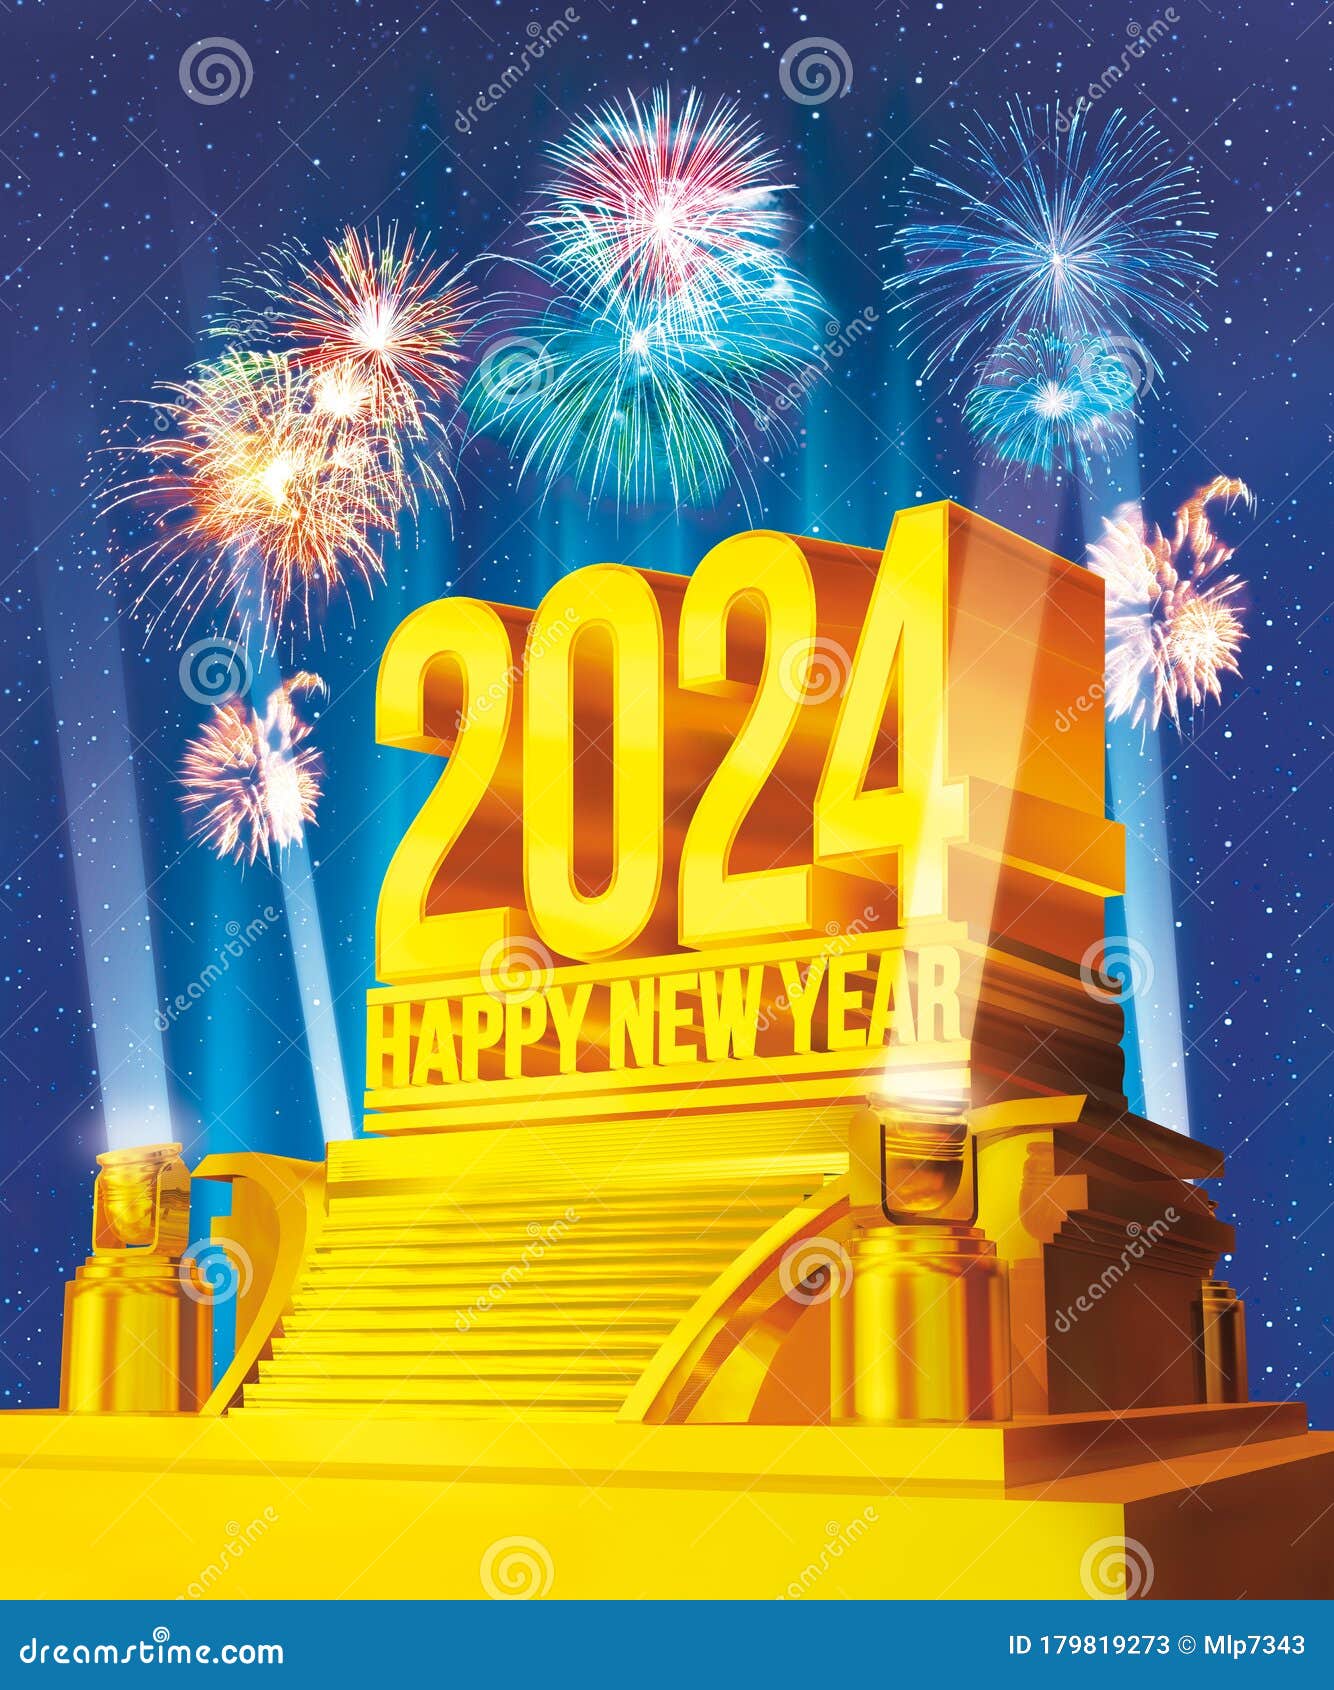 Golden Happy New Year 2024 on a Platform Against Starry Night and